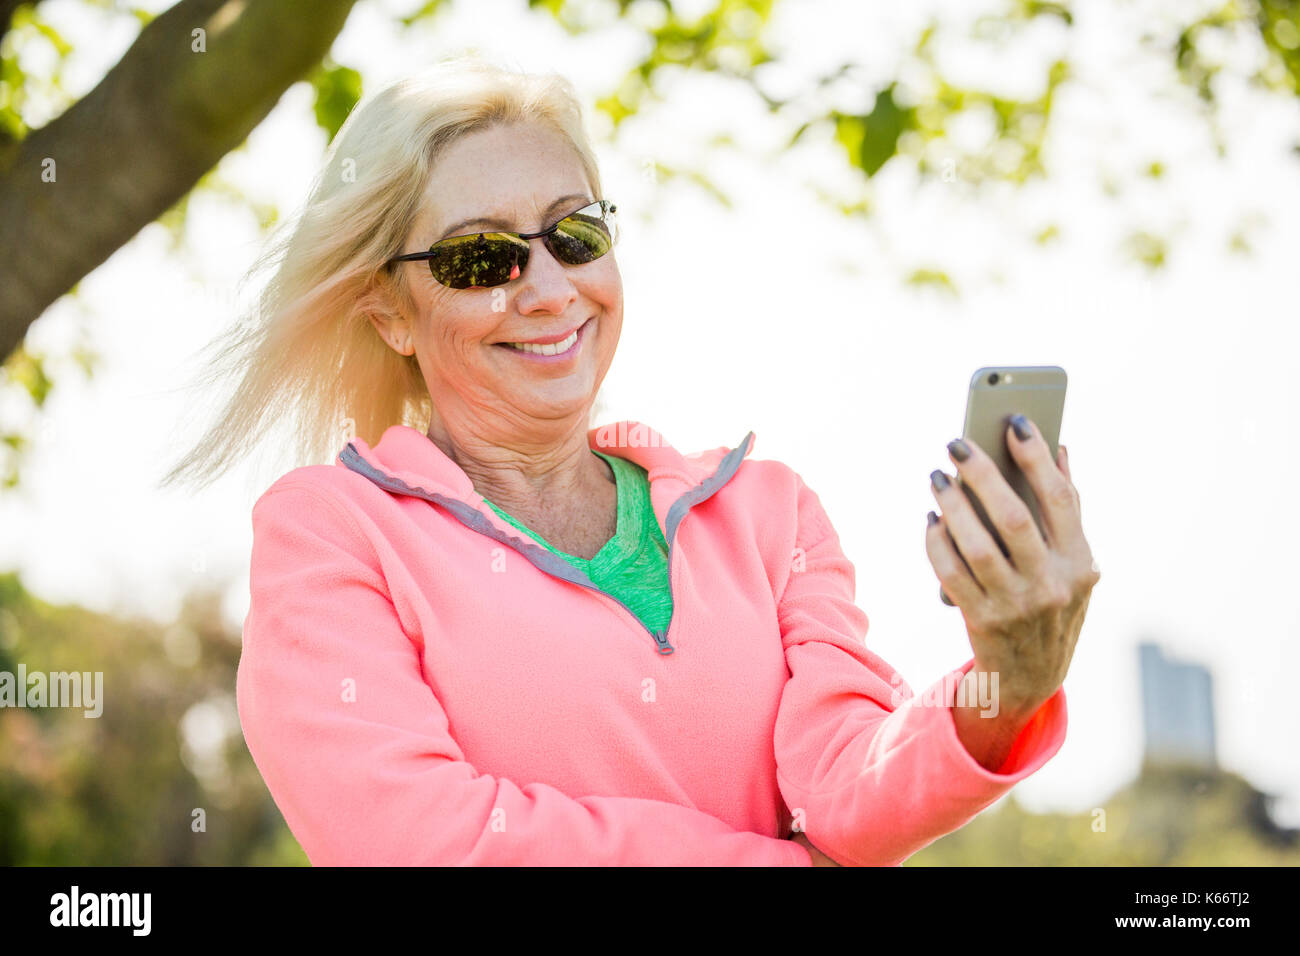 Wind blowing hair of Caucasian woman texting on cell phone Stock Photo